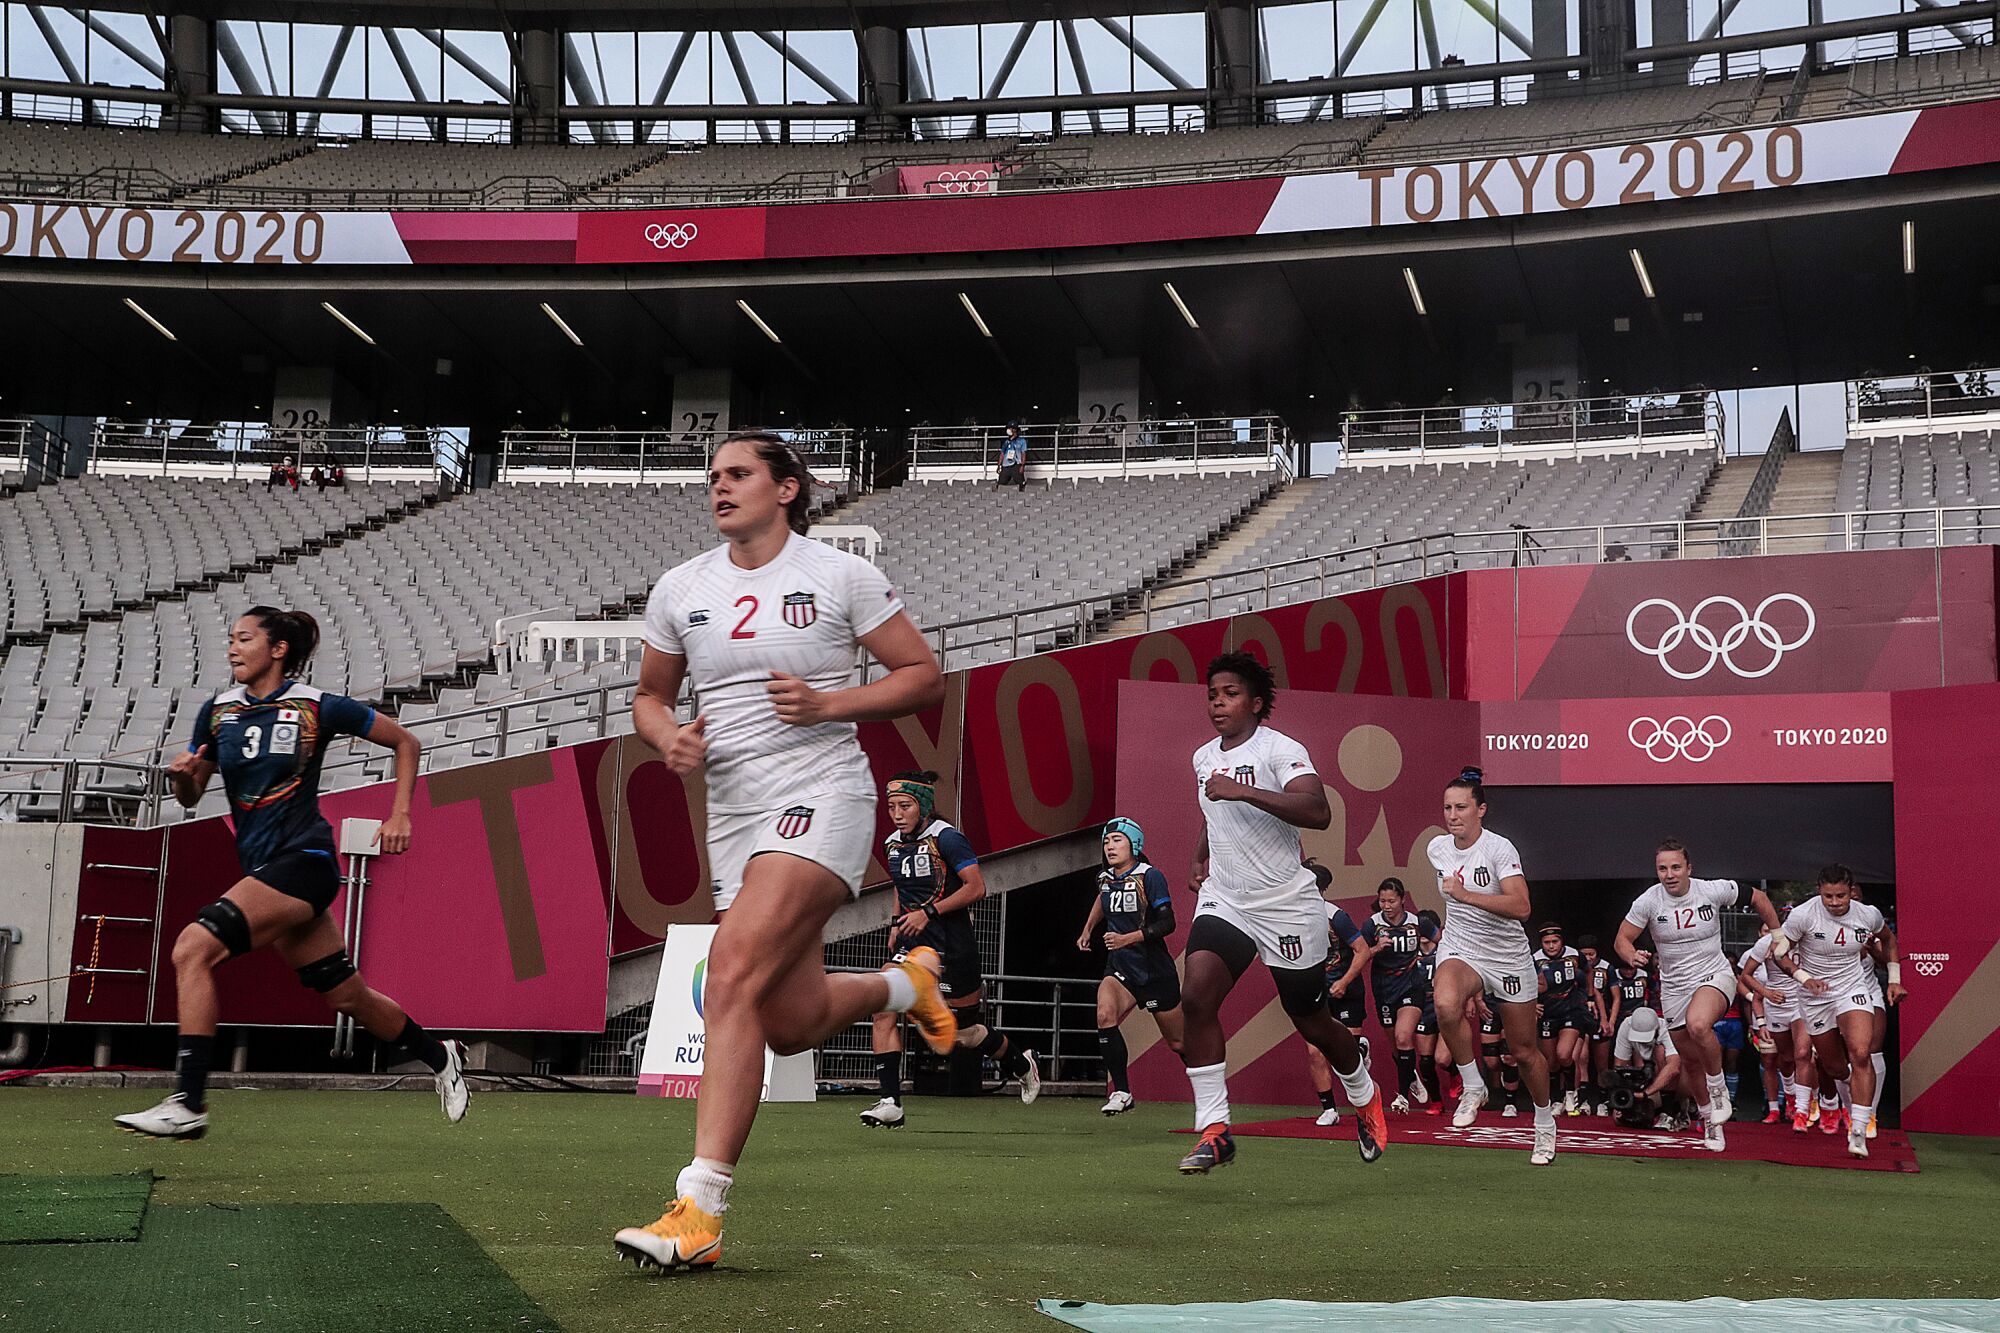 Team USA and Japan run onto the field for a Tokyo 2020 Olympics Women's Rugby Sevens game